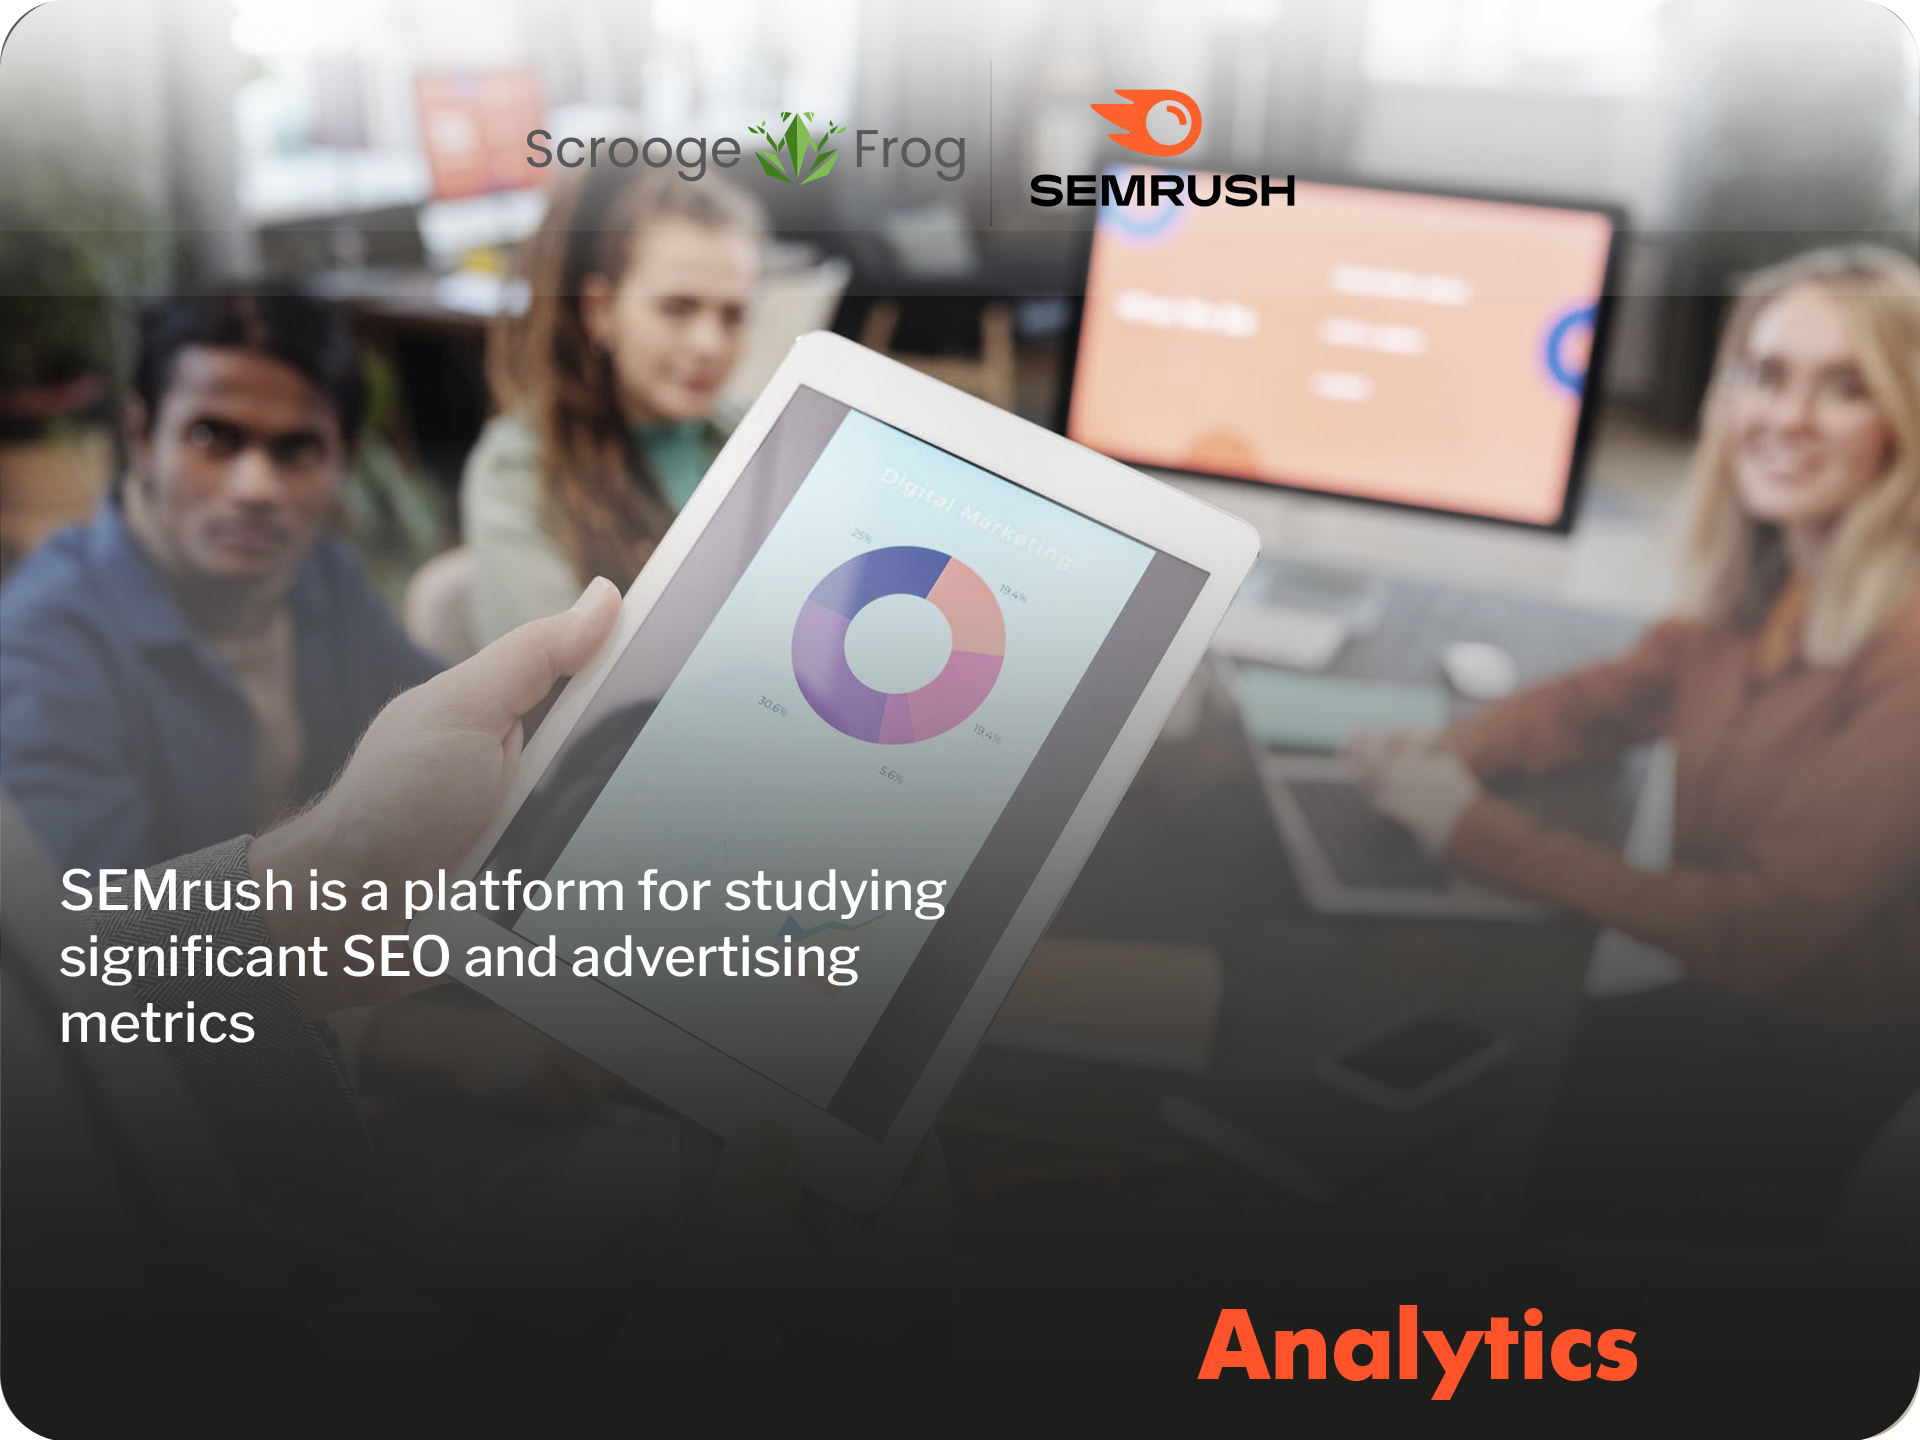 SEMrush is a platform for studying significant SEO and advertising metrics